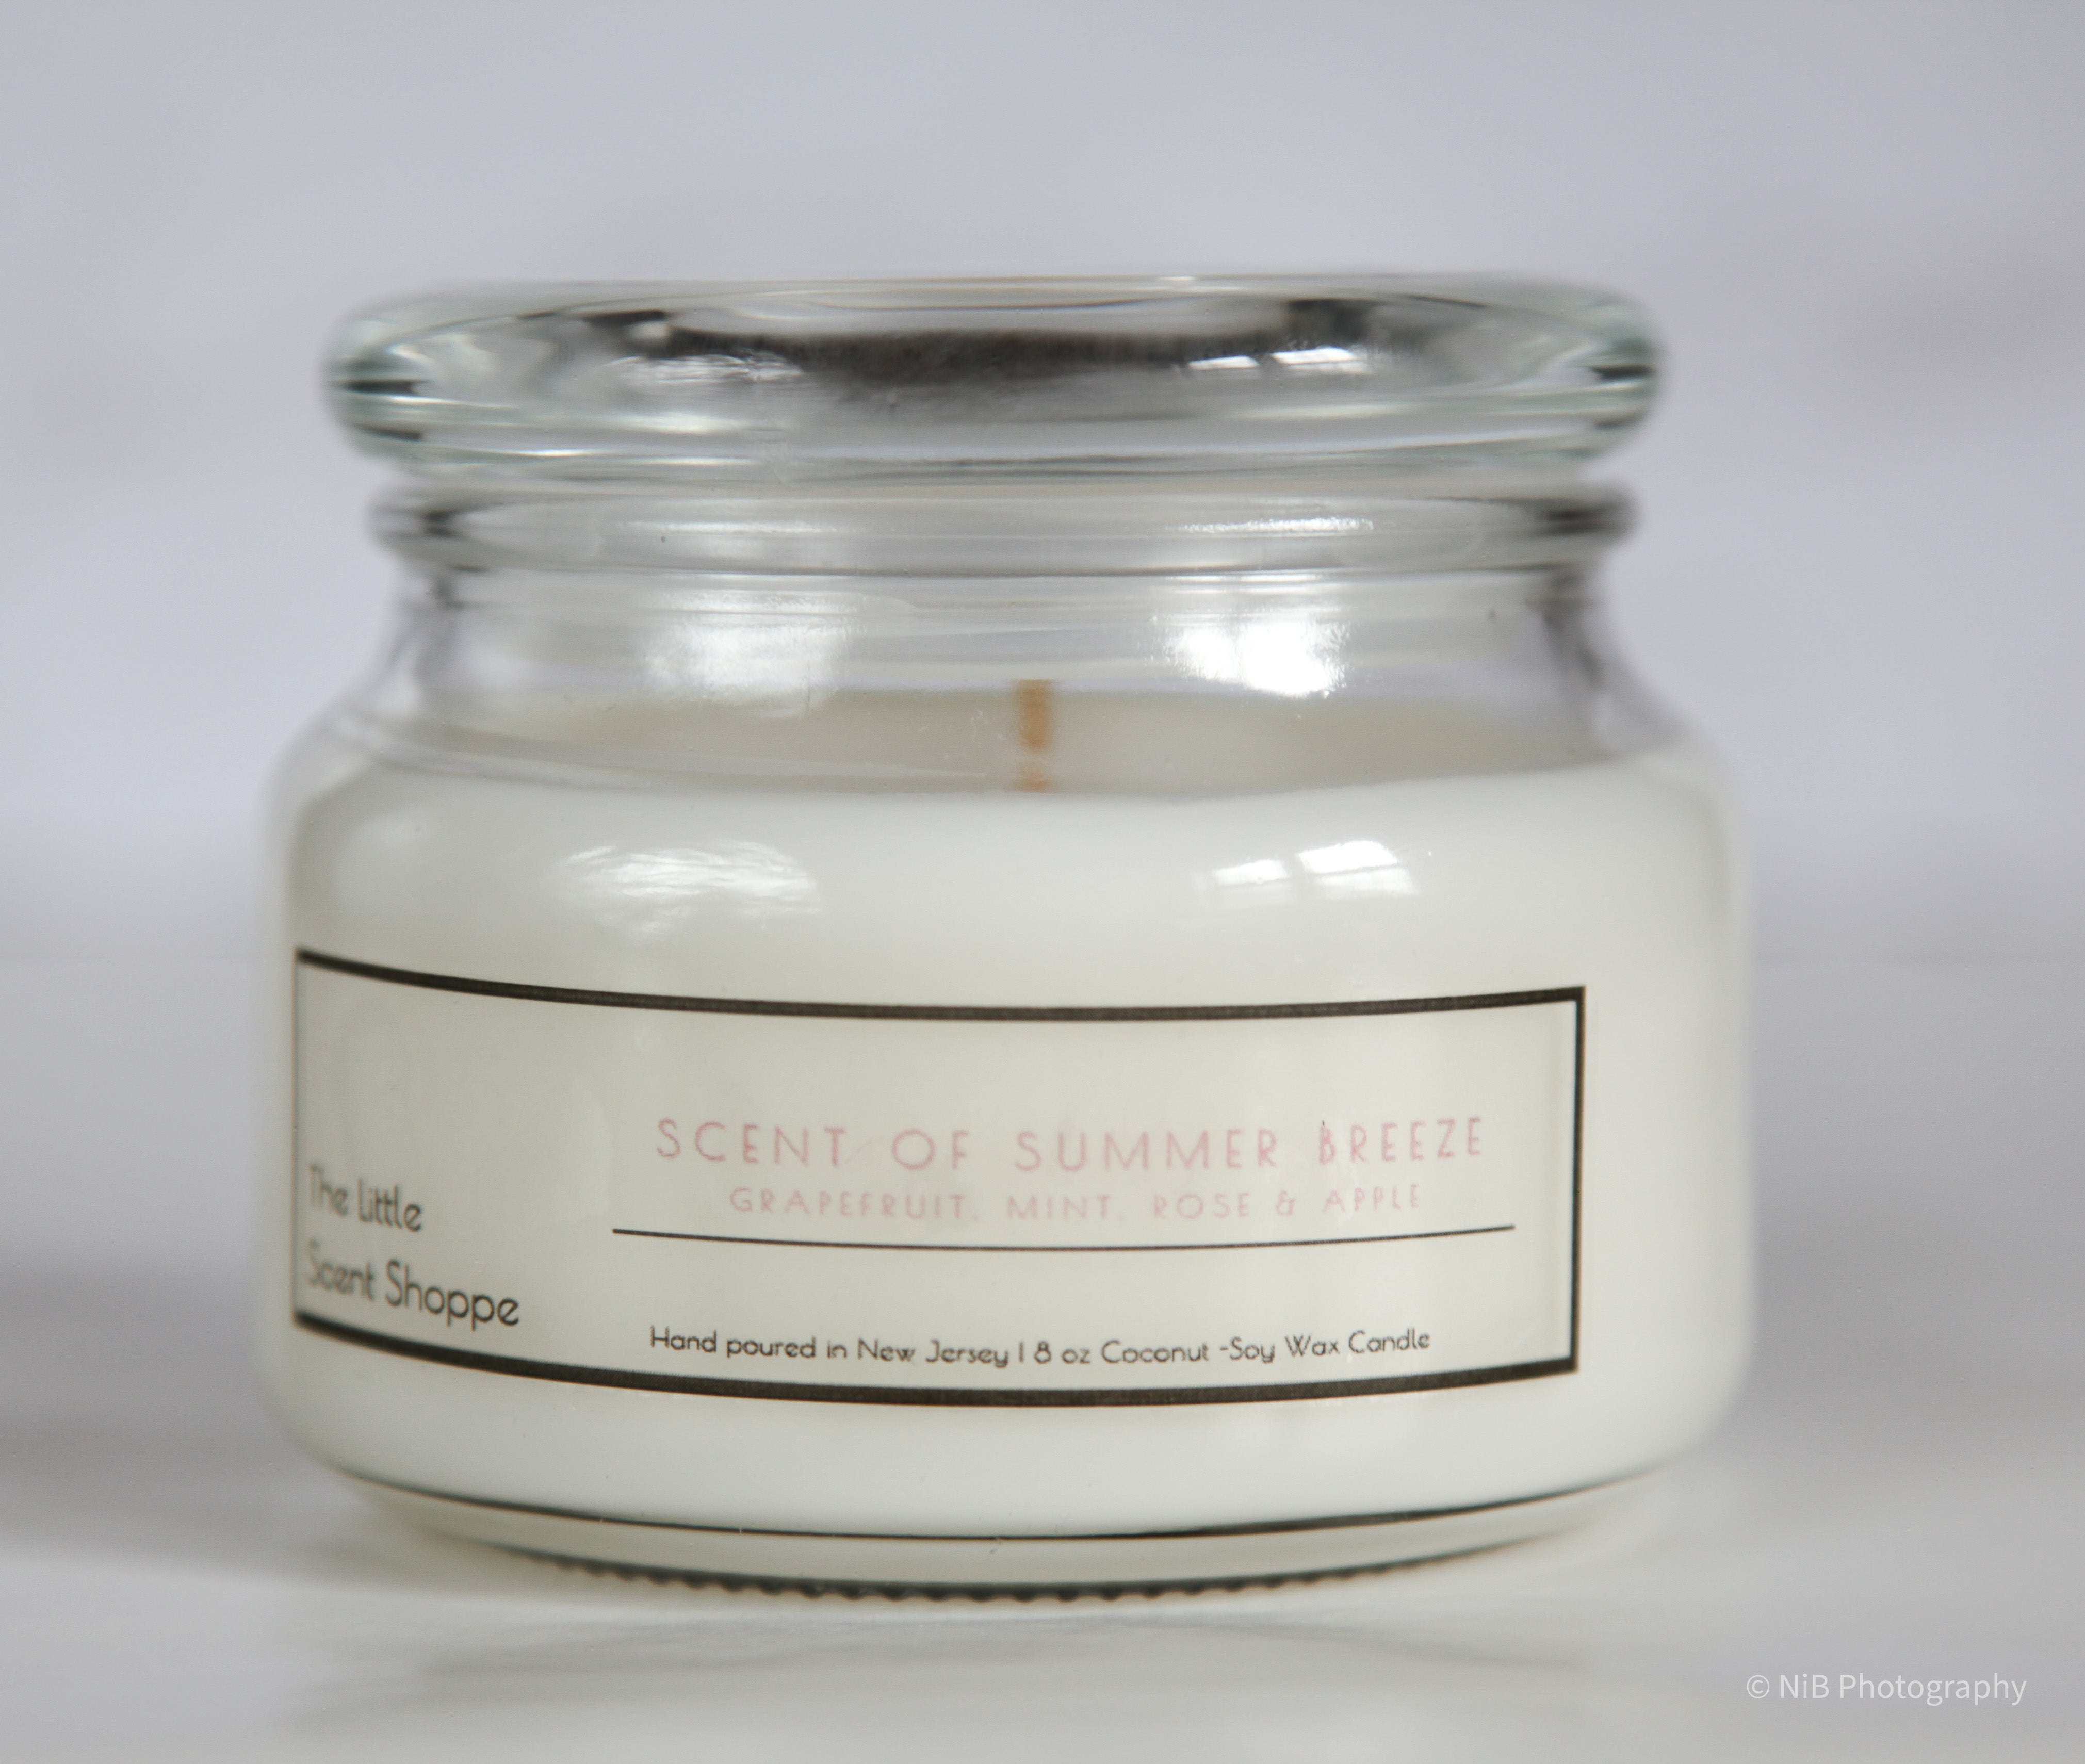 Scent of Summer Breeze Candle - The Little Scent Shoppe